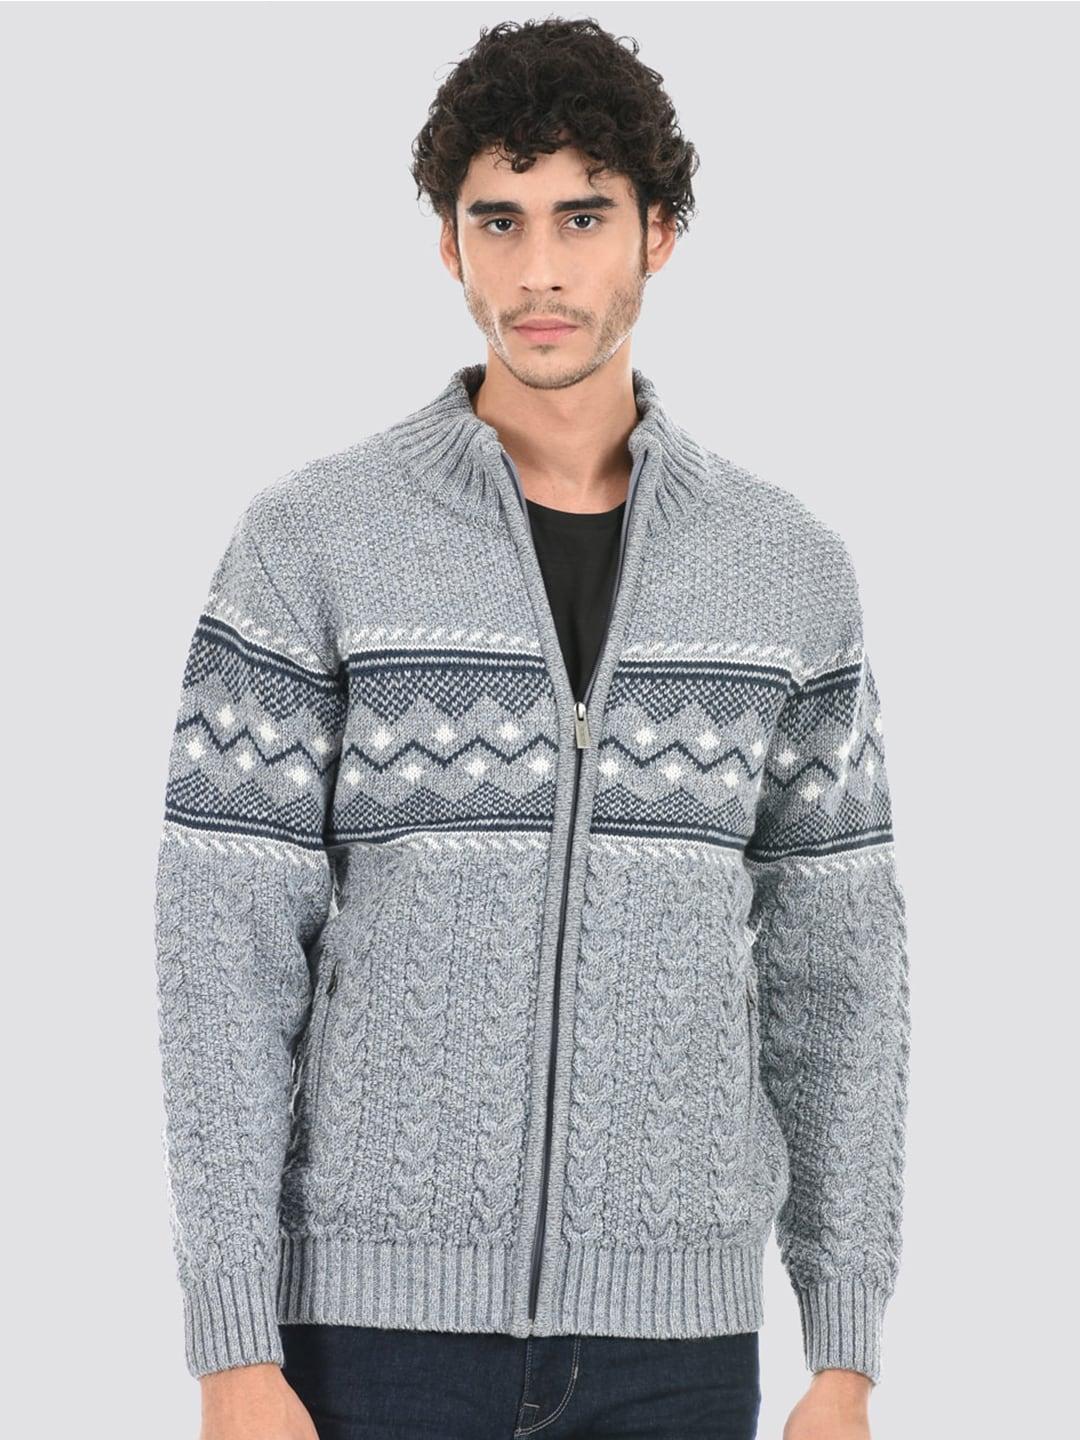 london-fog-cable-knit-cardigan-sweater